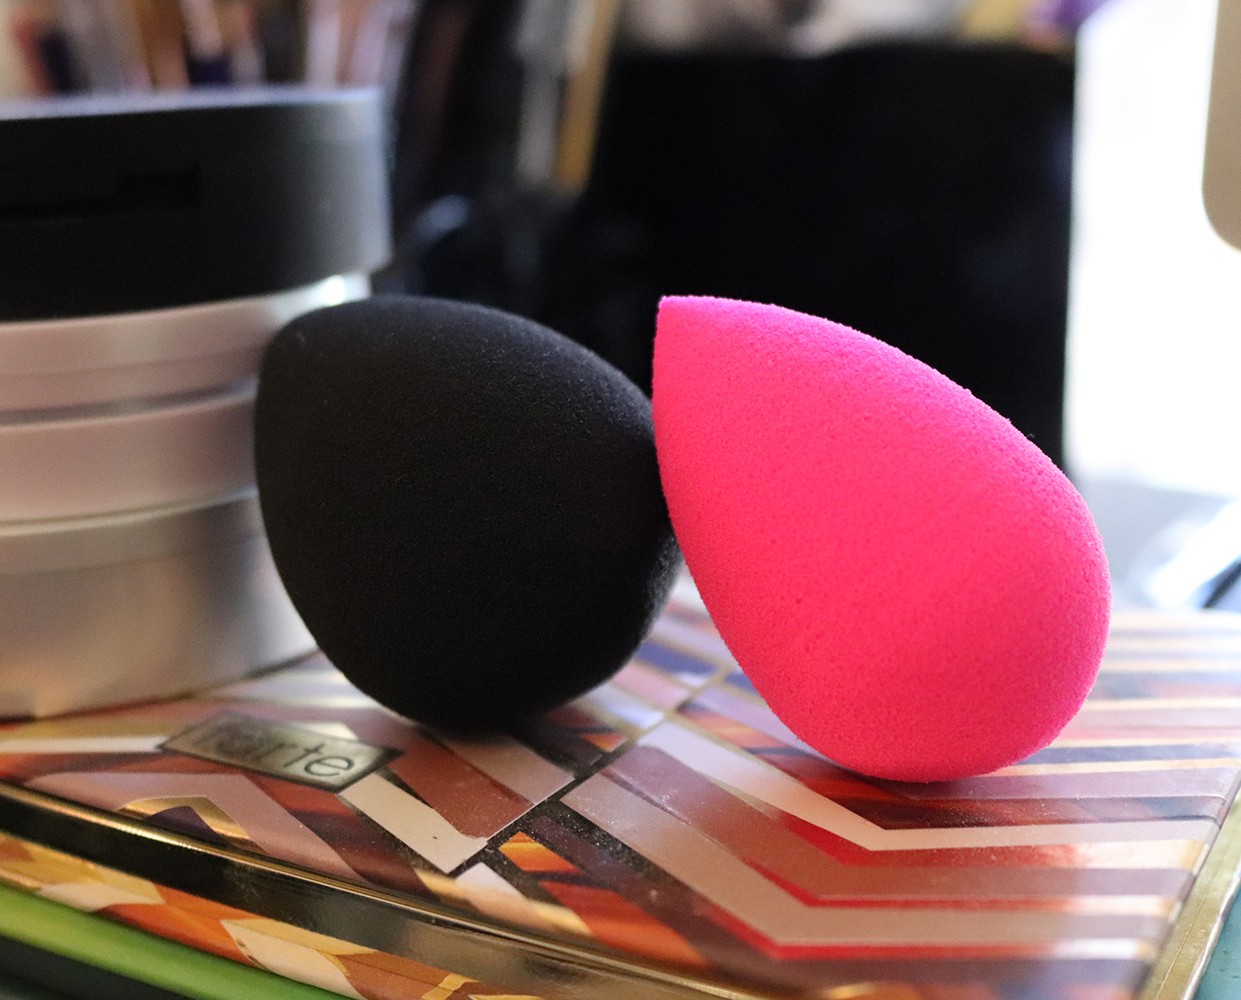 Lamora - Did I Just Find a Beauty Blender Dupe? featured by popular Los Angeles cruelty free beauty blogger My Beauty Bunny